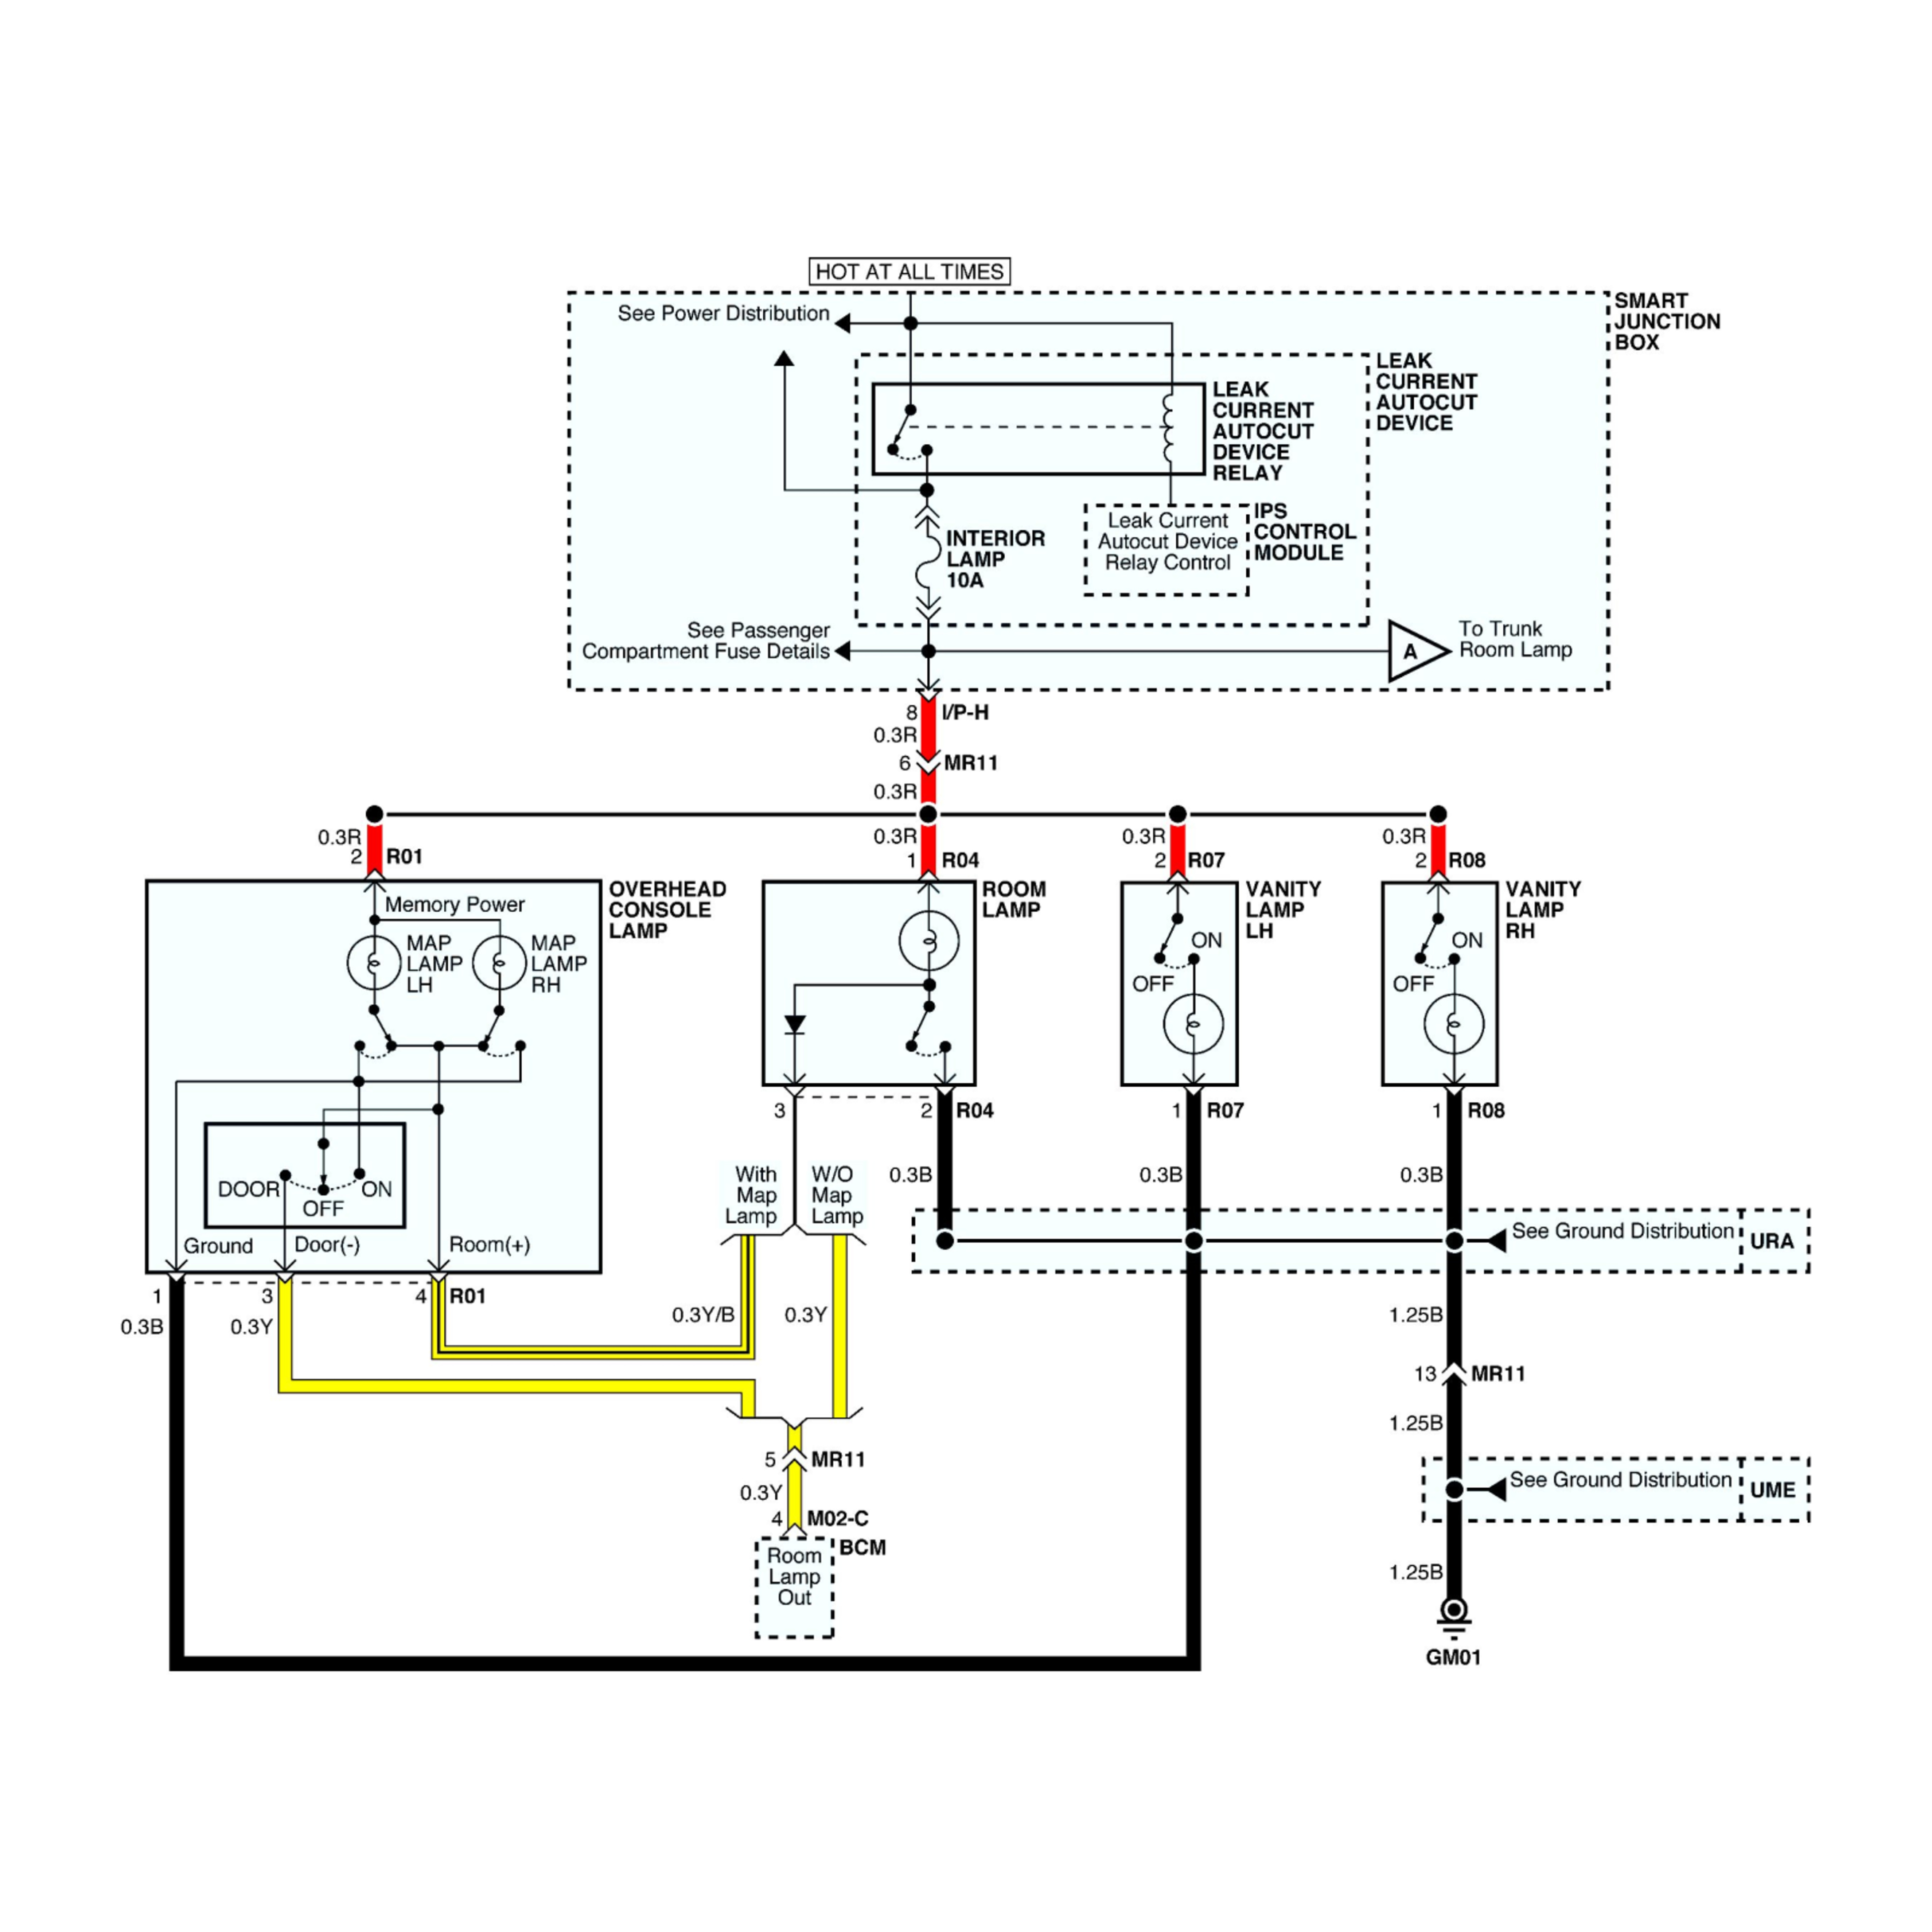 2010 Audi A3 wiring diagrams example